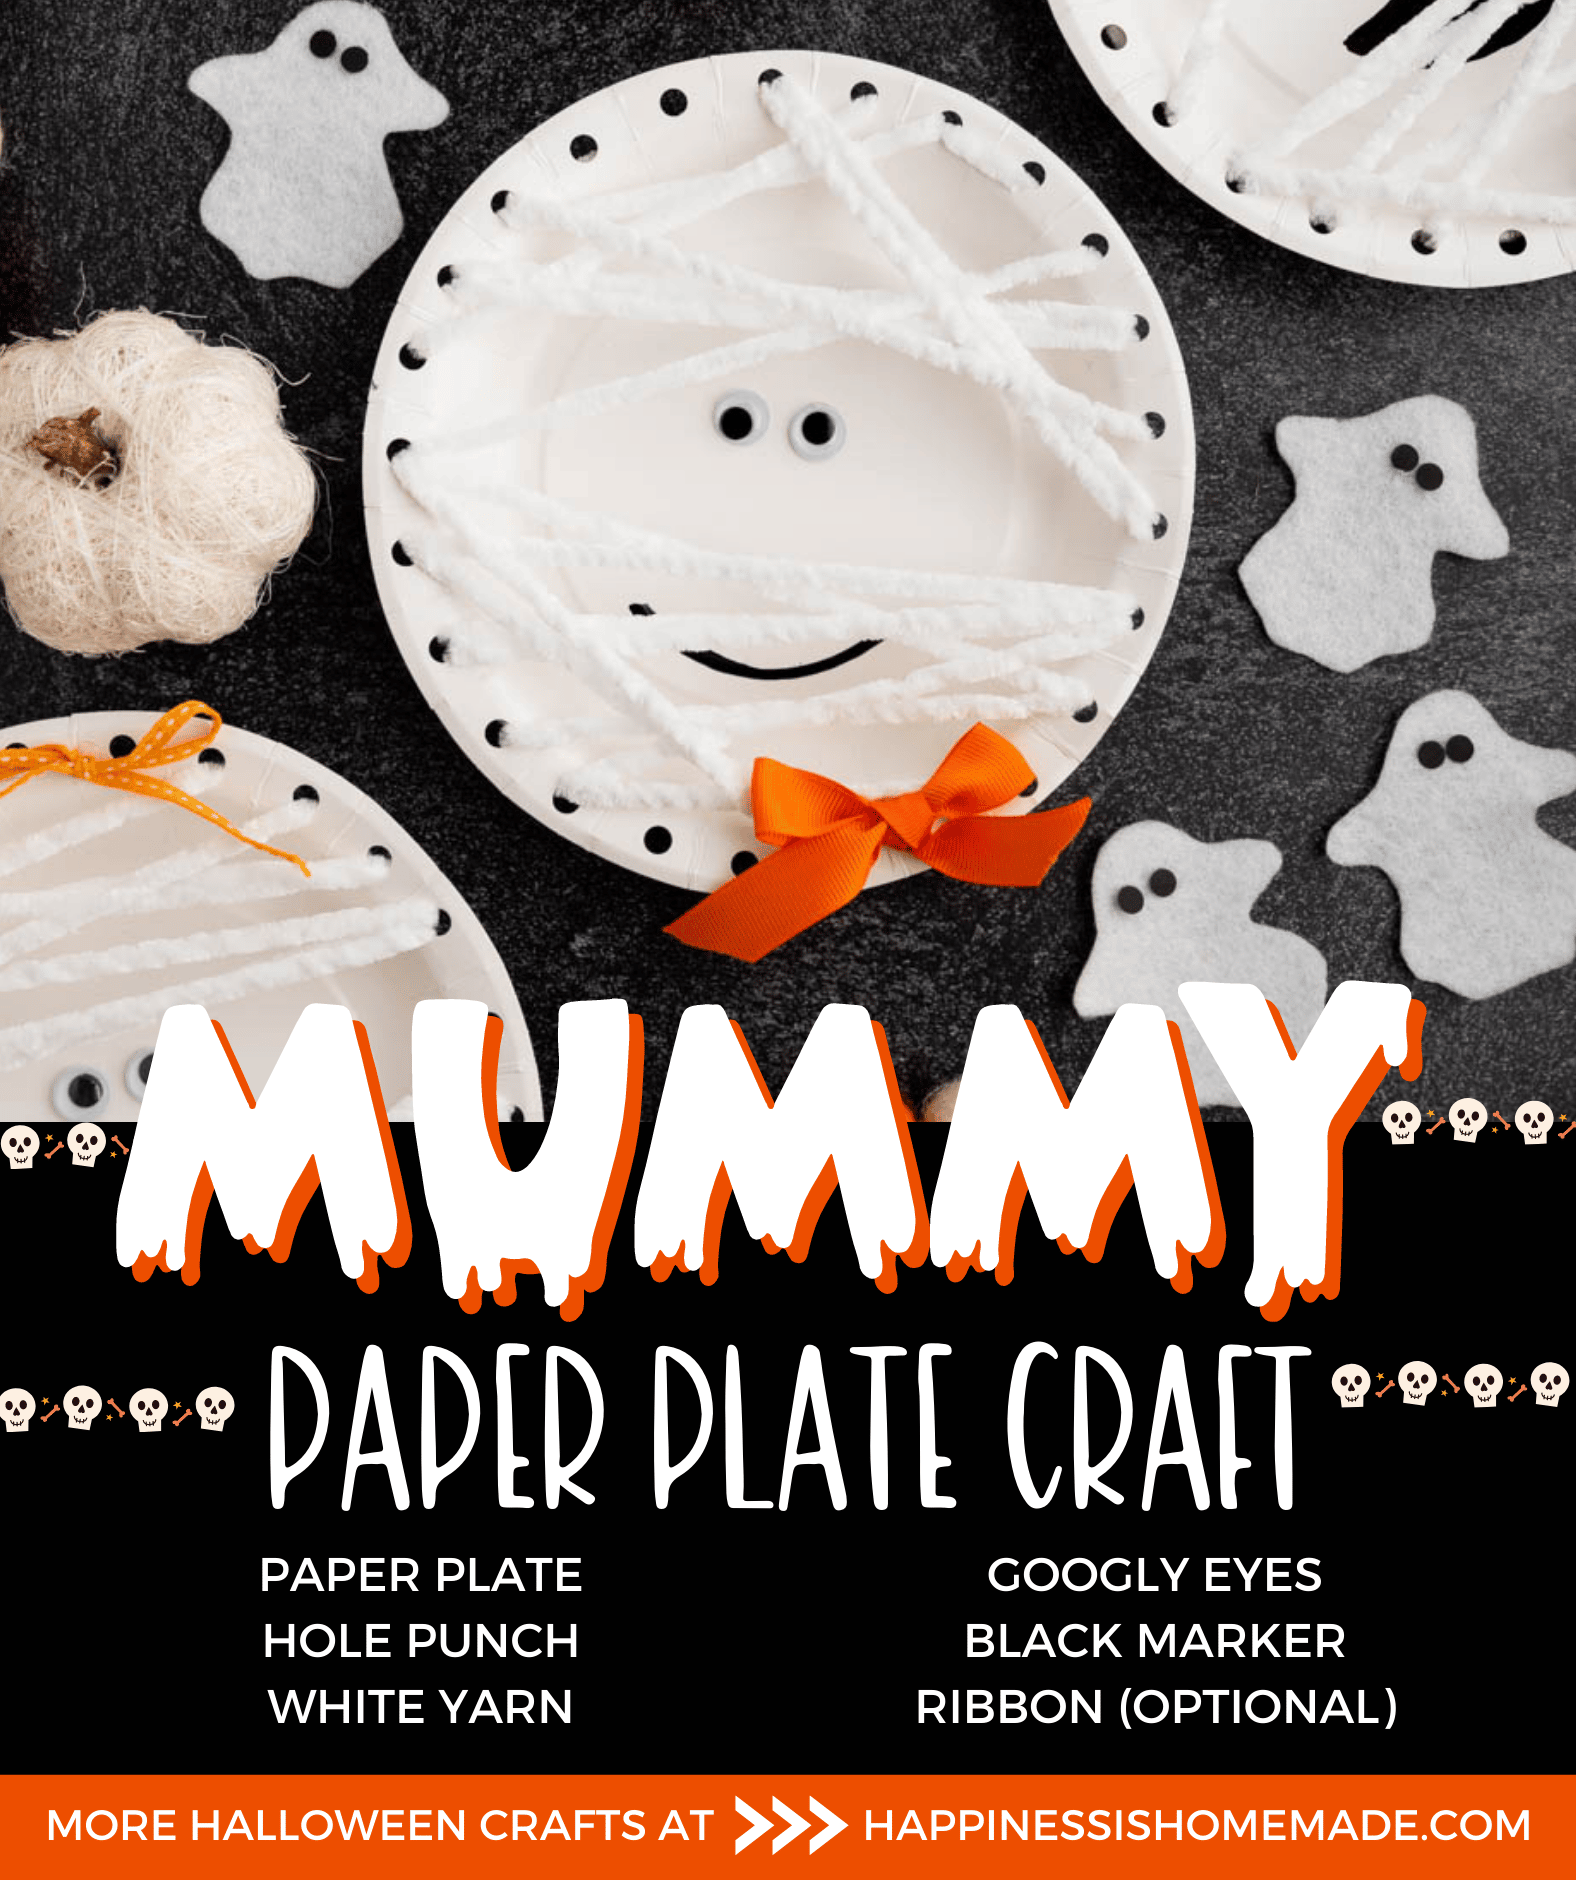 Mummy Paper Plate: Halloween Craft for Kids - Happiness is Homemade